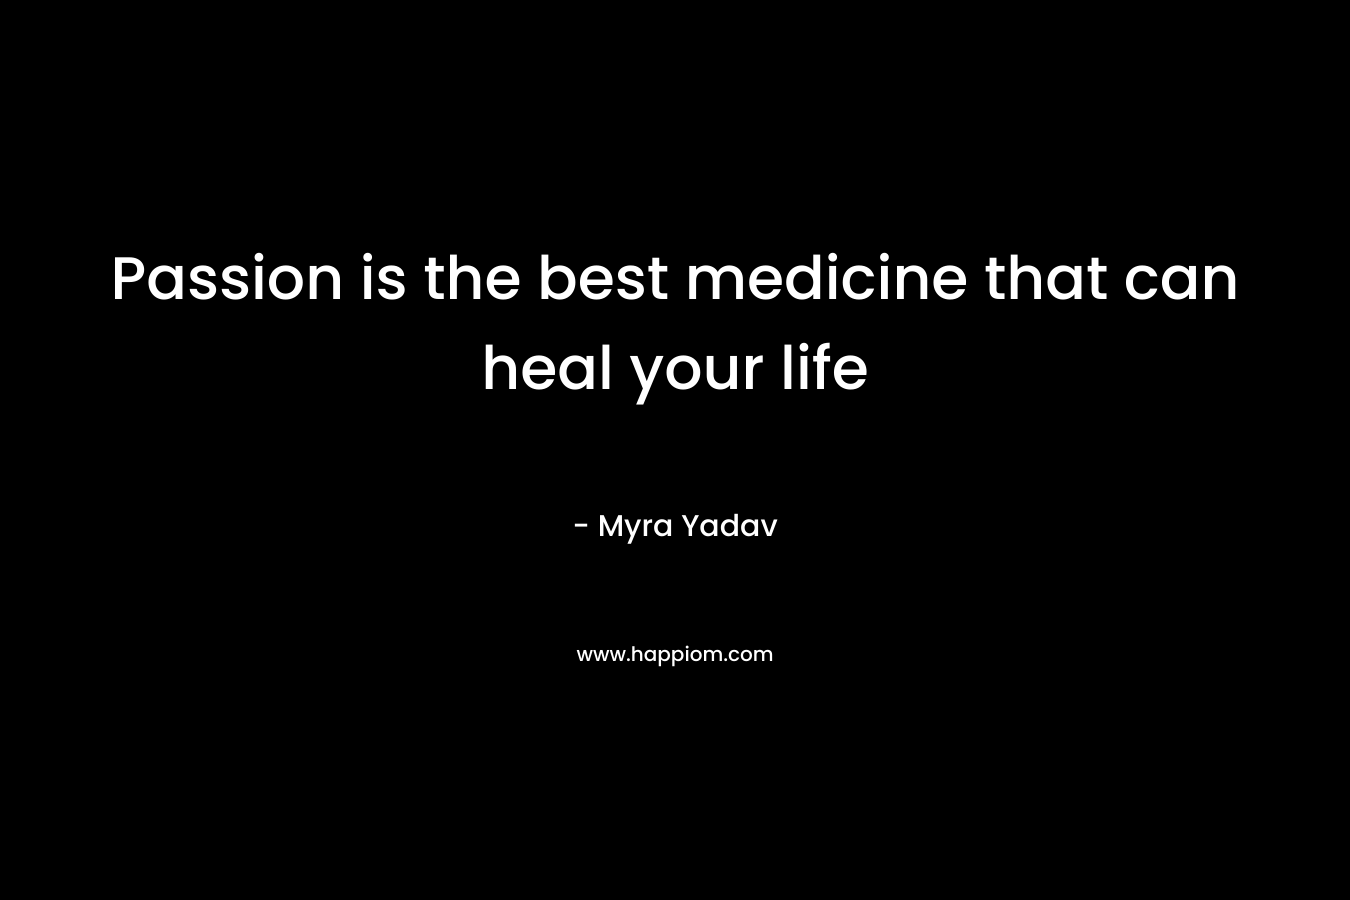 Passion is the best medicine that can heal your life